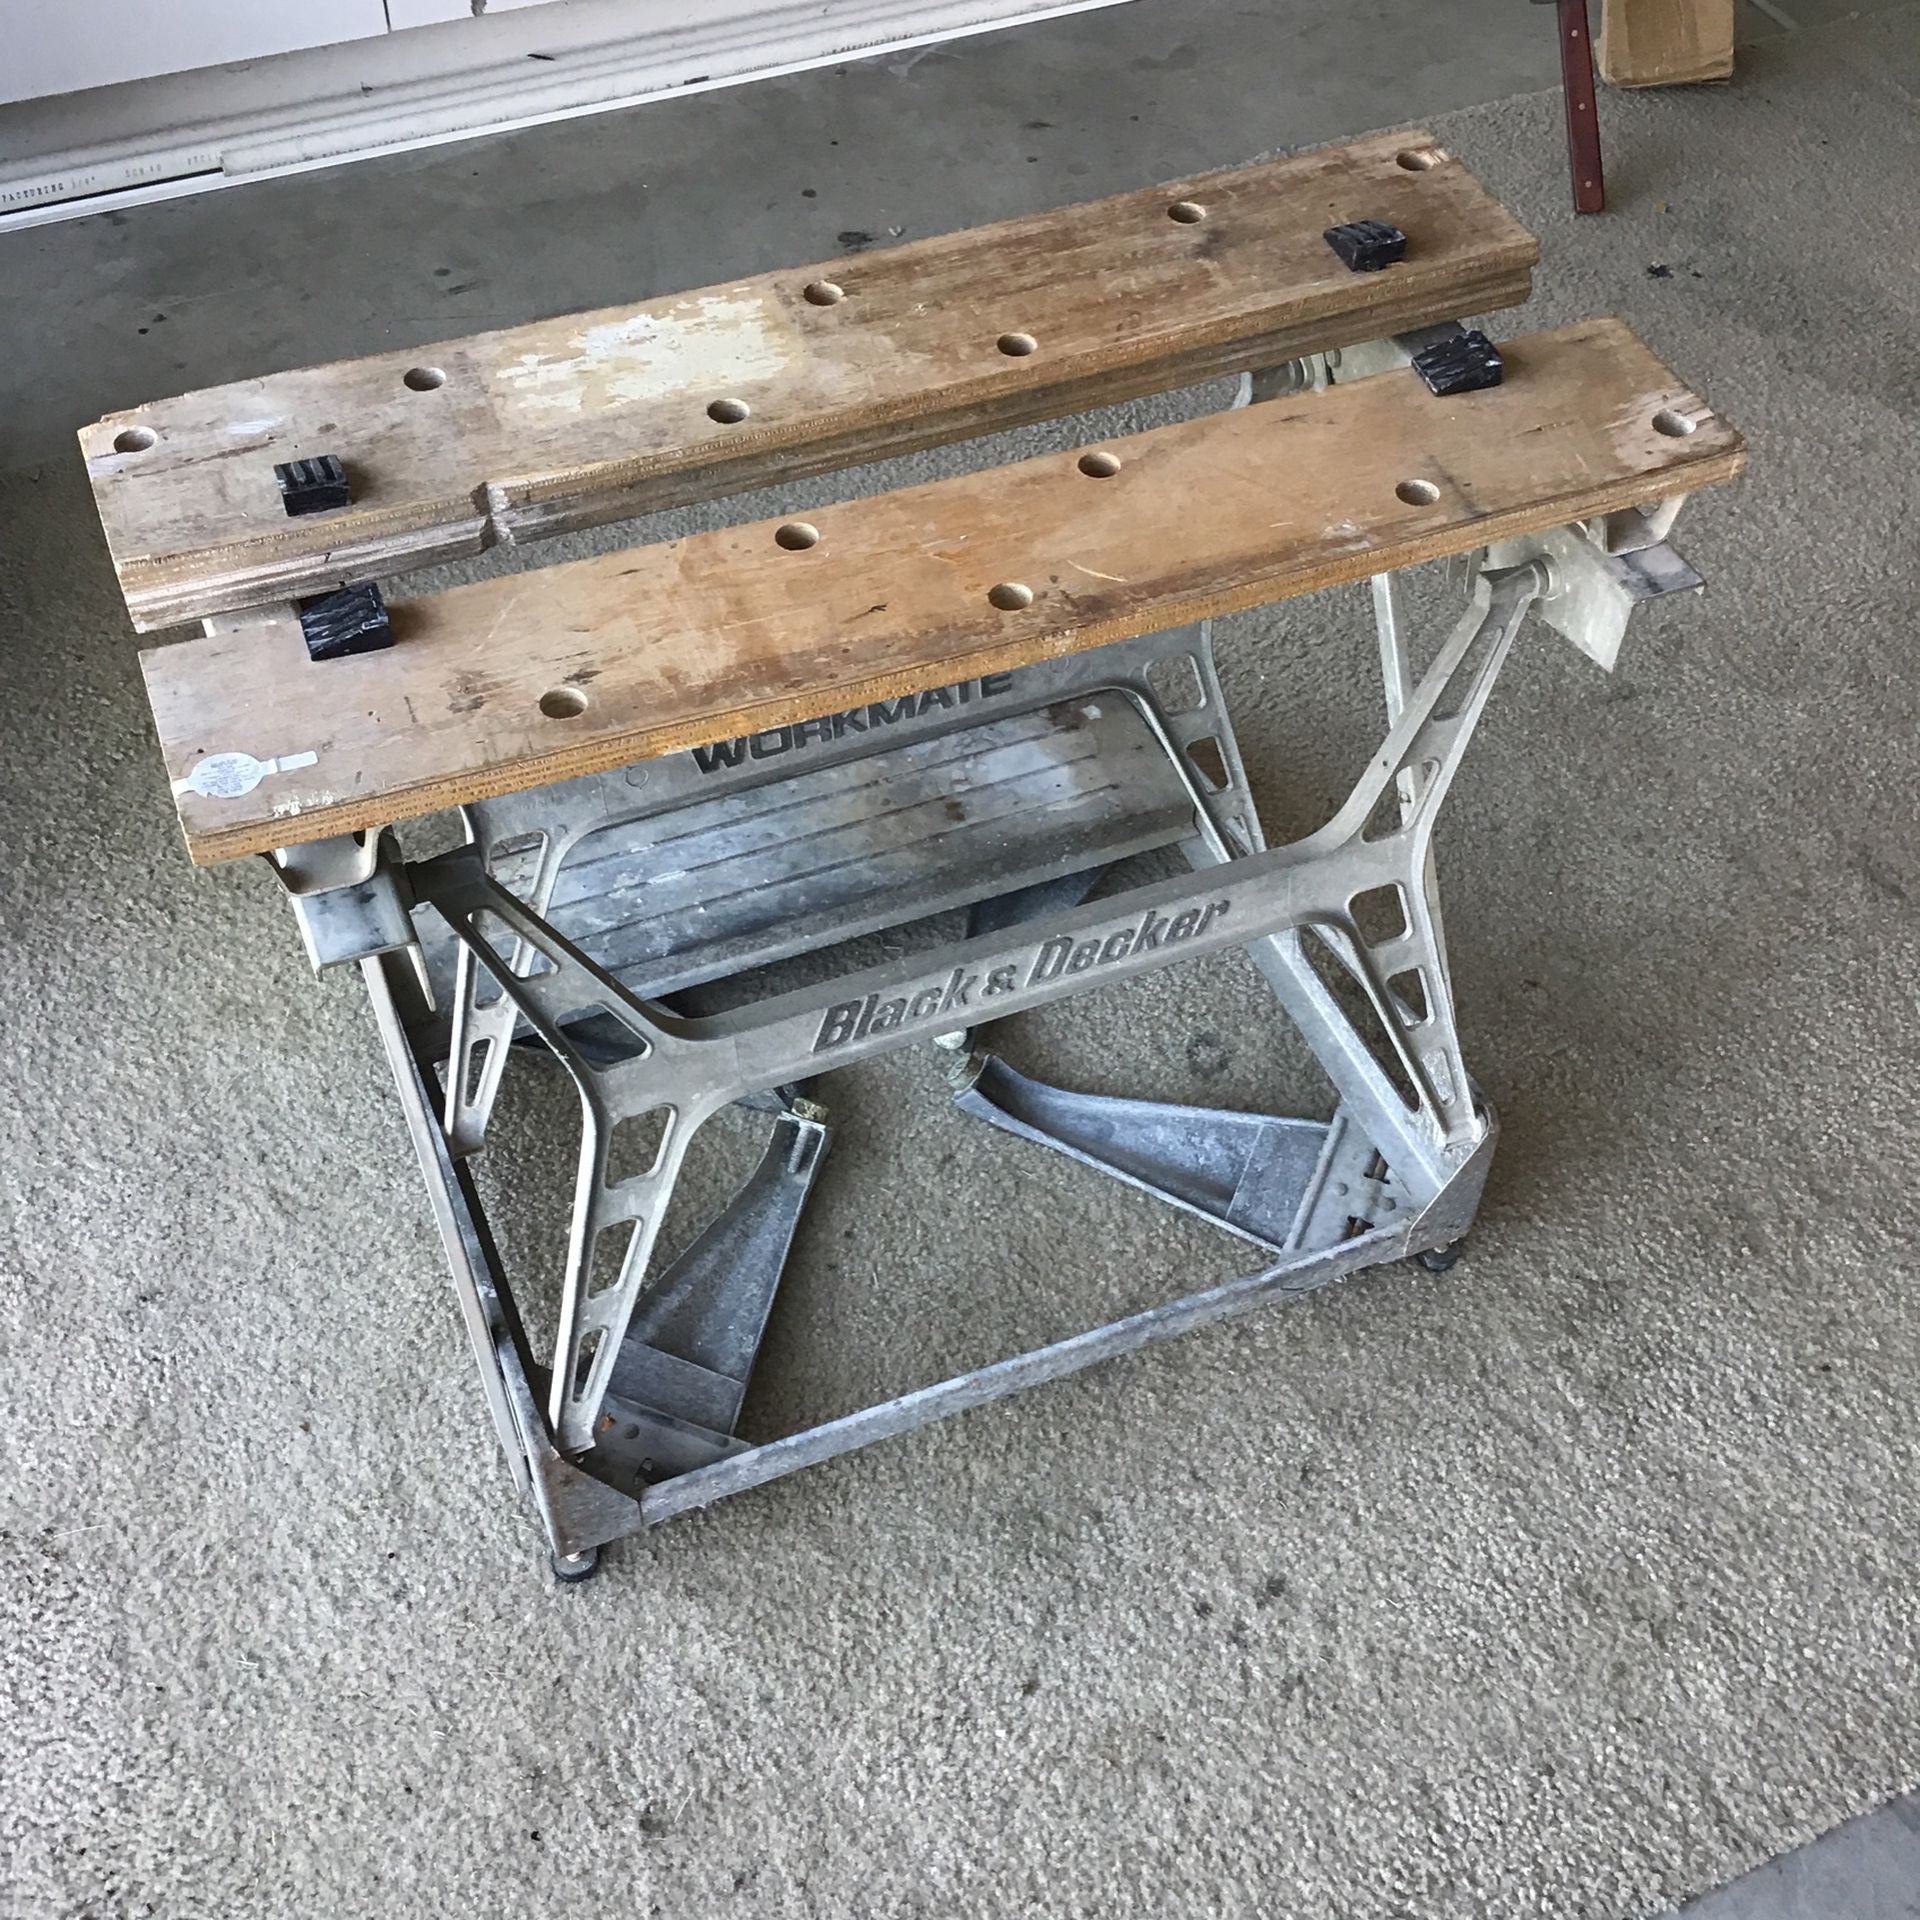 Black+Decker Ready To Build Workbench for Sale in Los Angeles, CA - OfferUp